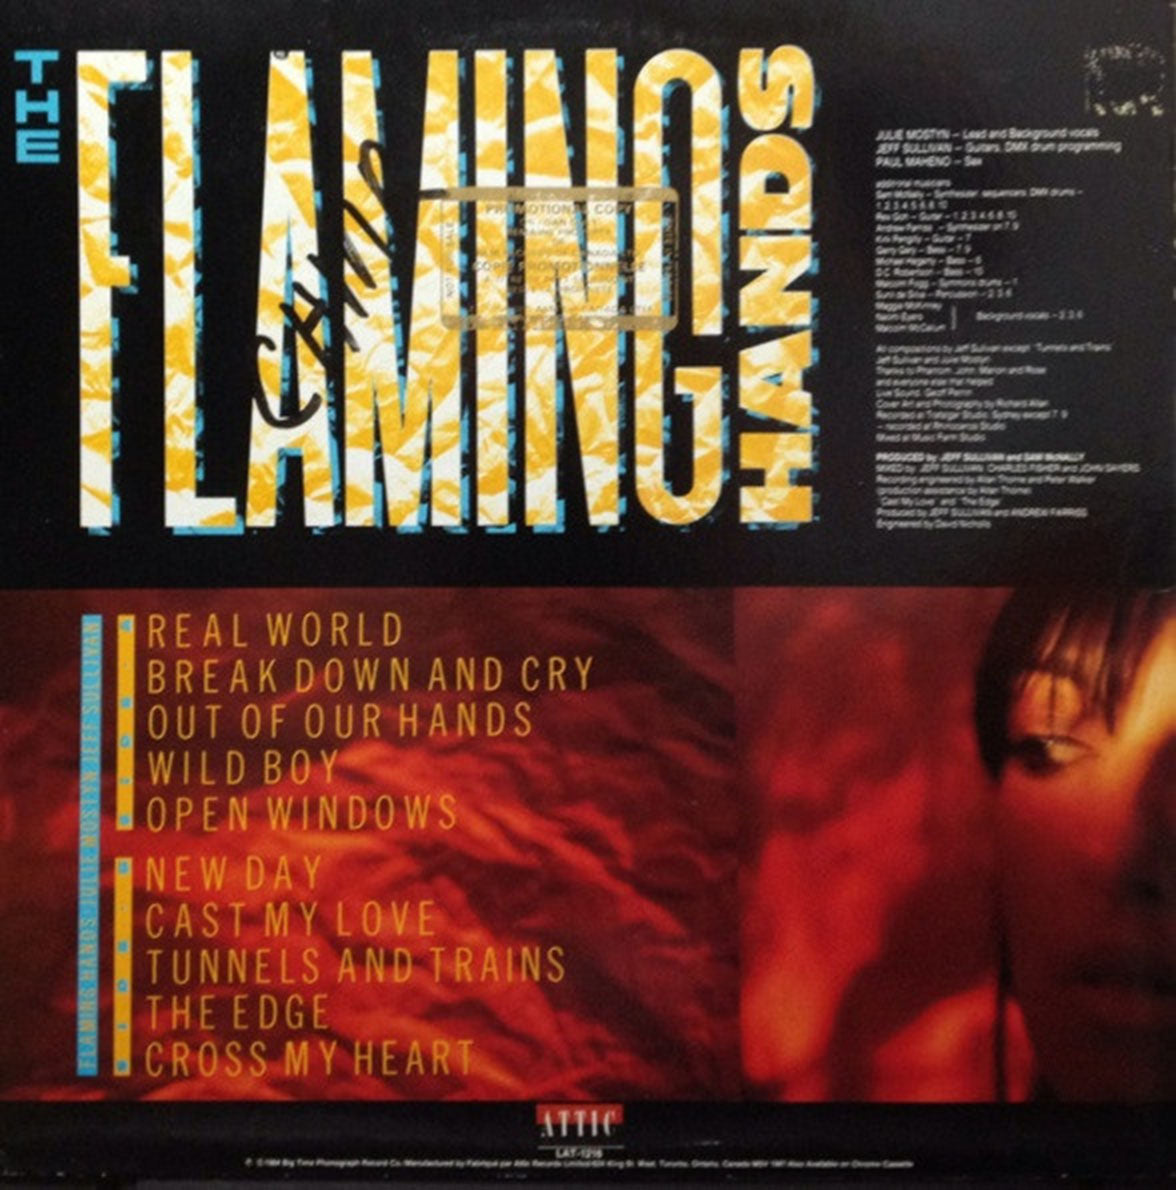 The Flaming Hands – Flaming Hands